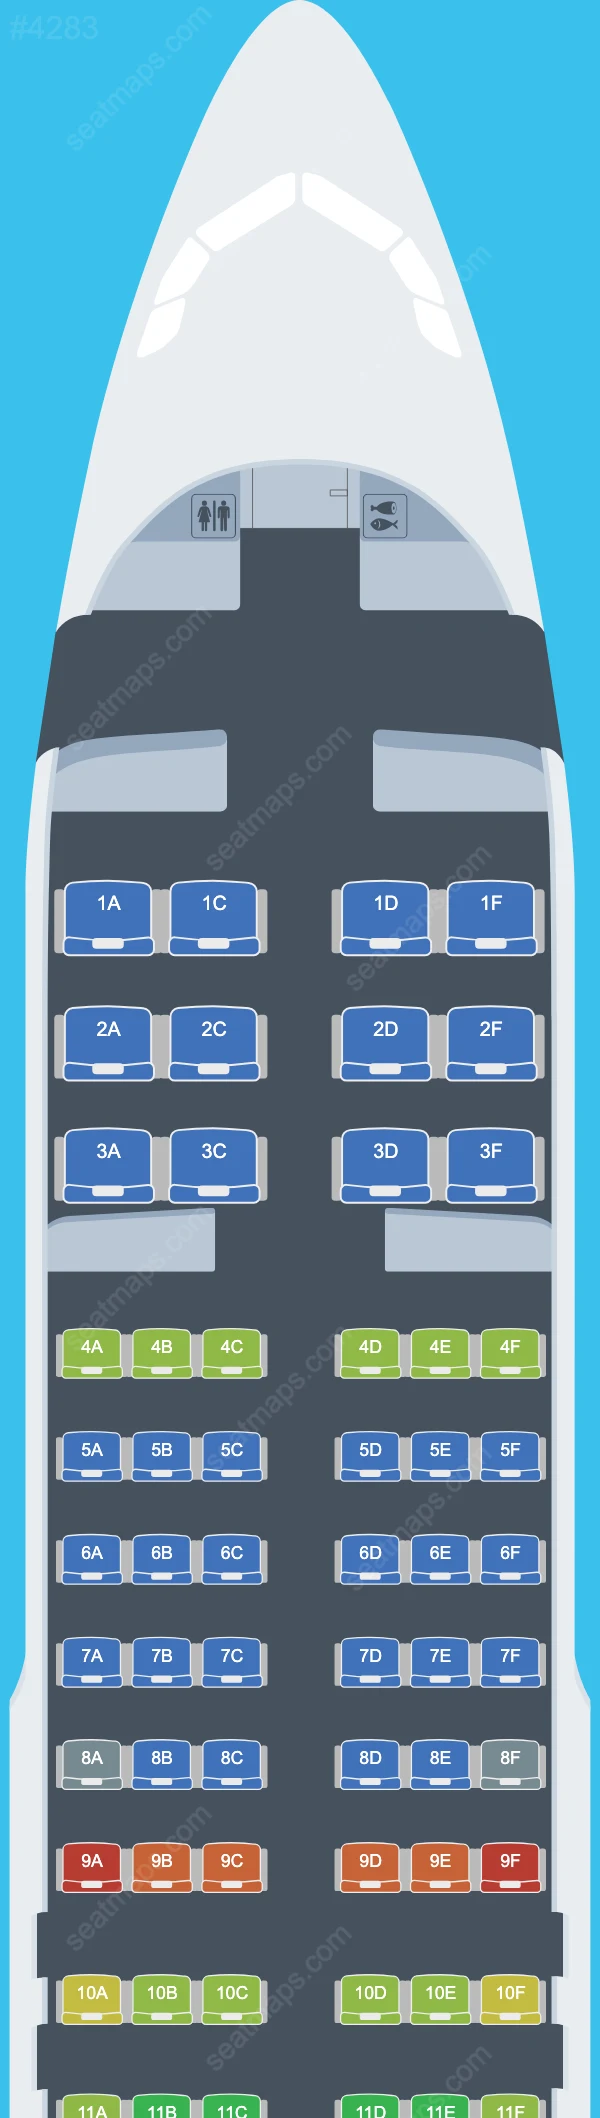 Ural Airlines Airbus A320 Seat Maps A320-200 V.1